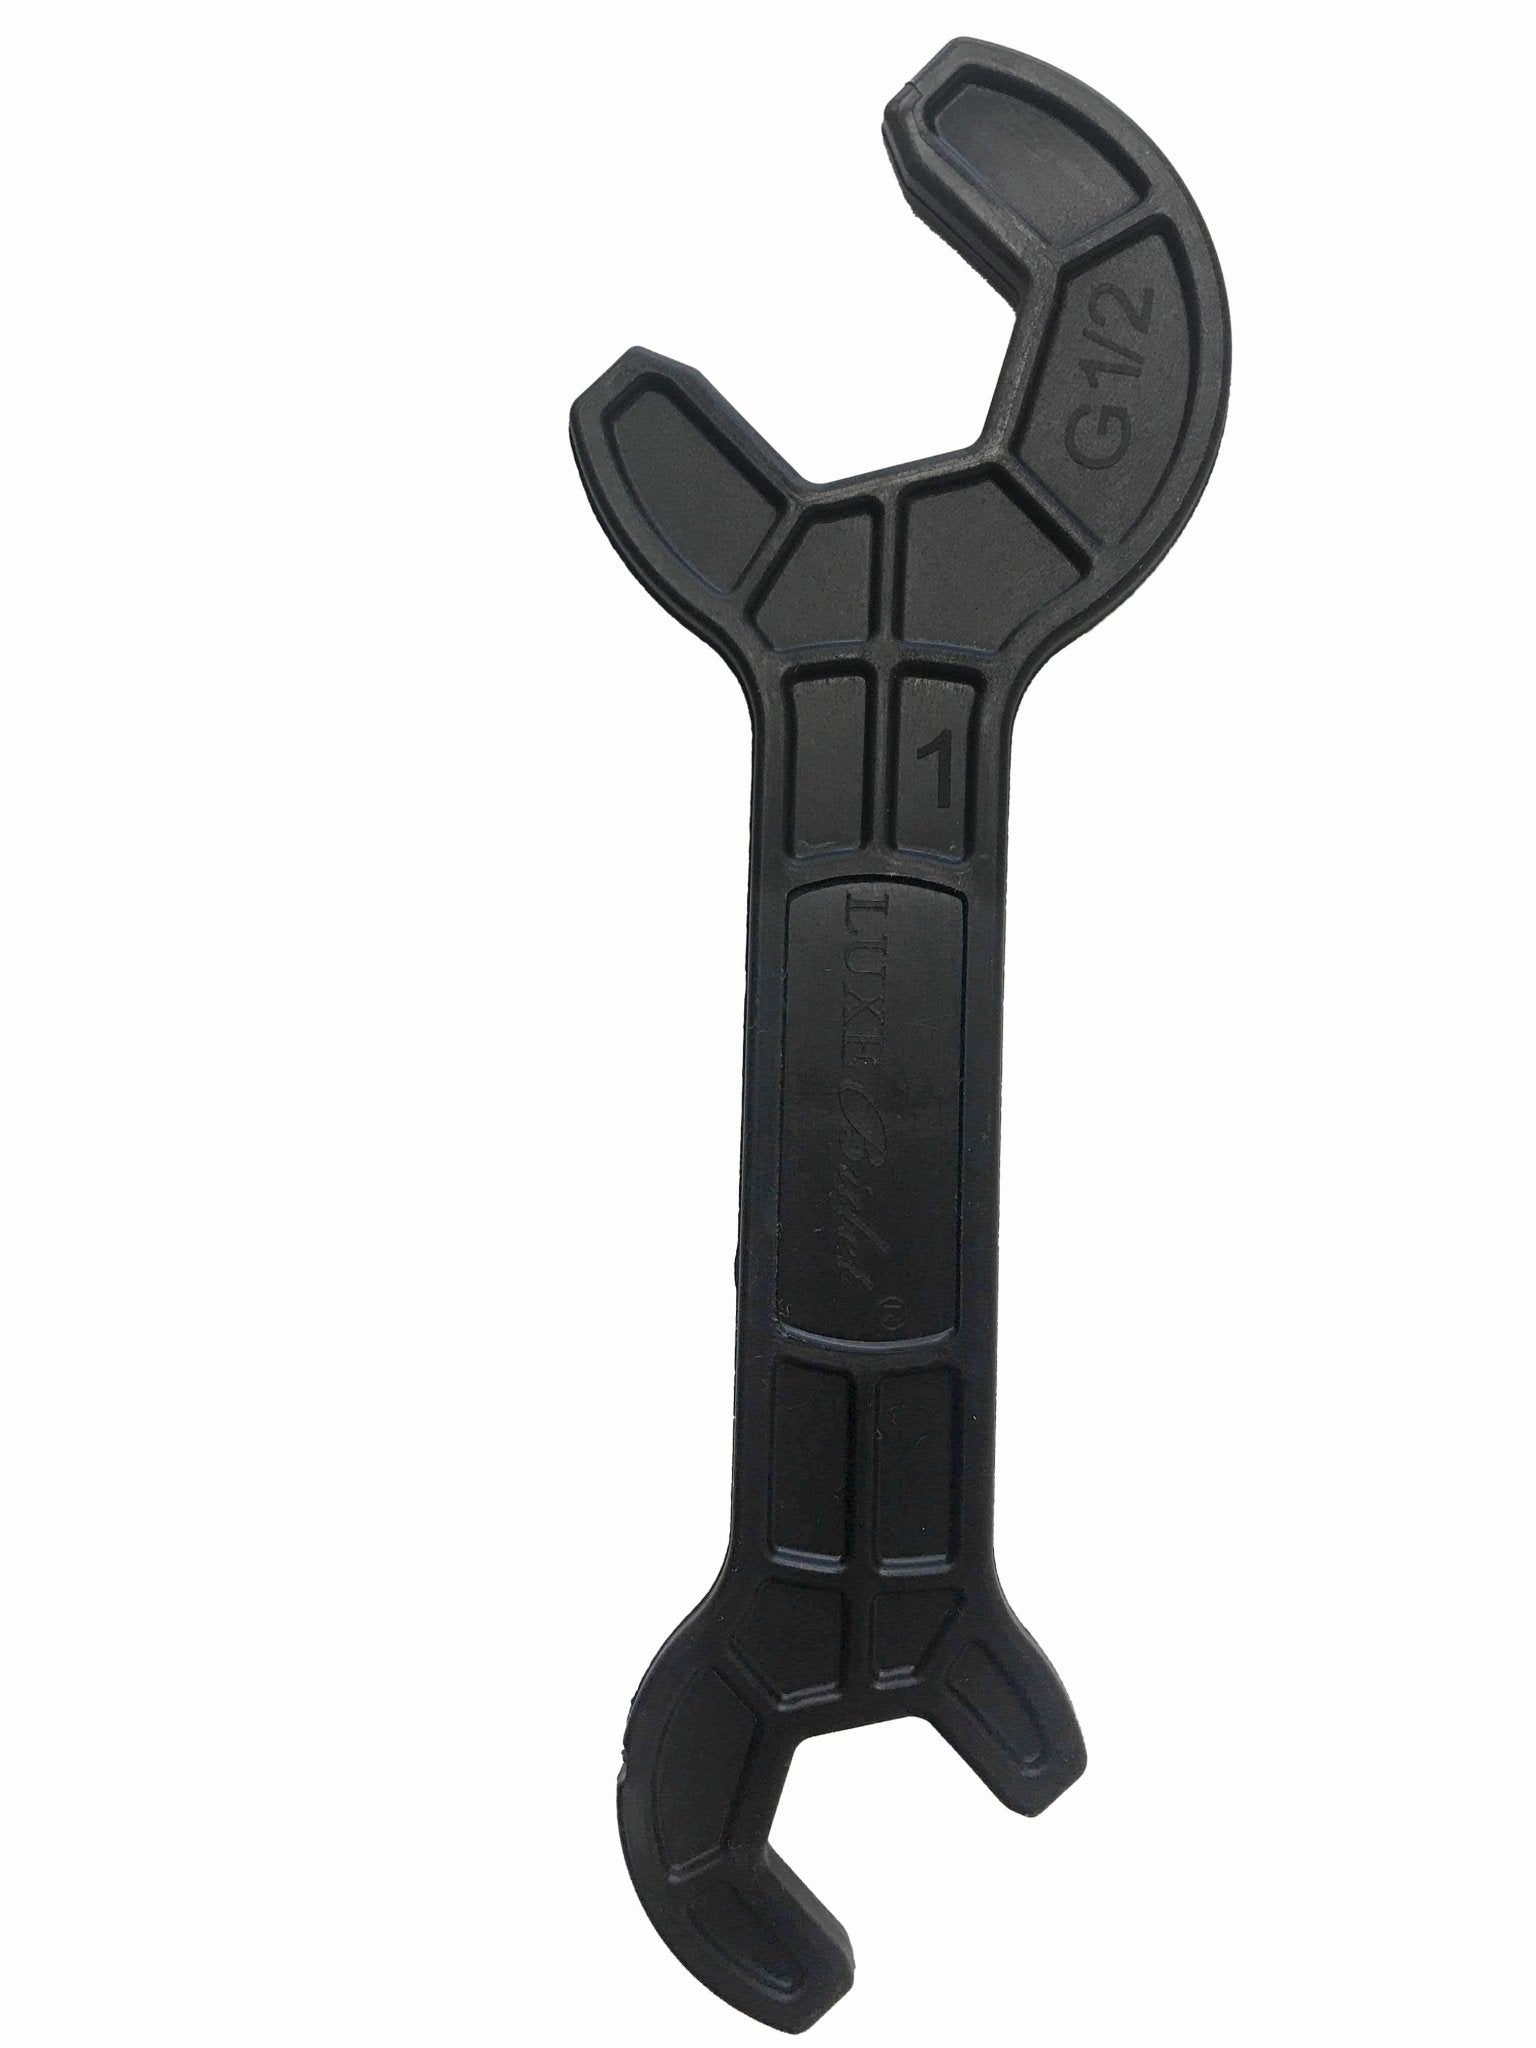 Plastic Wrenches - 1/2 inch by 1/4 inch plastic wrench